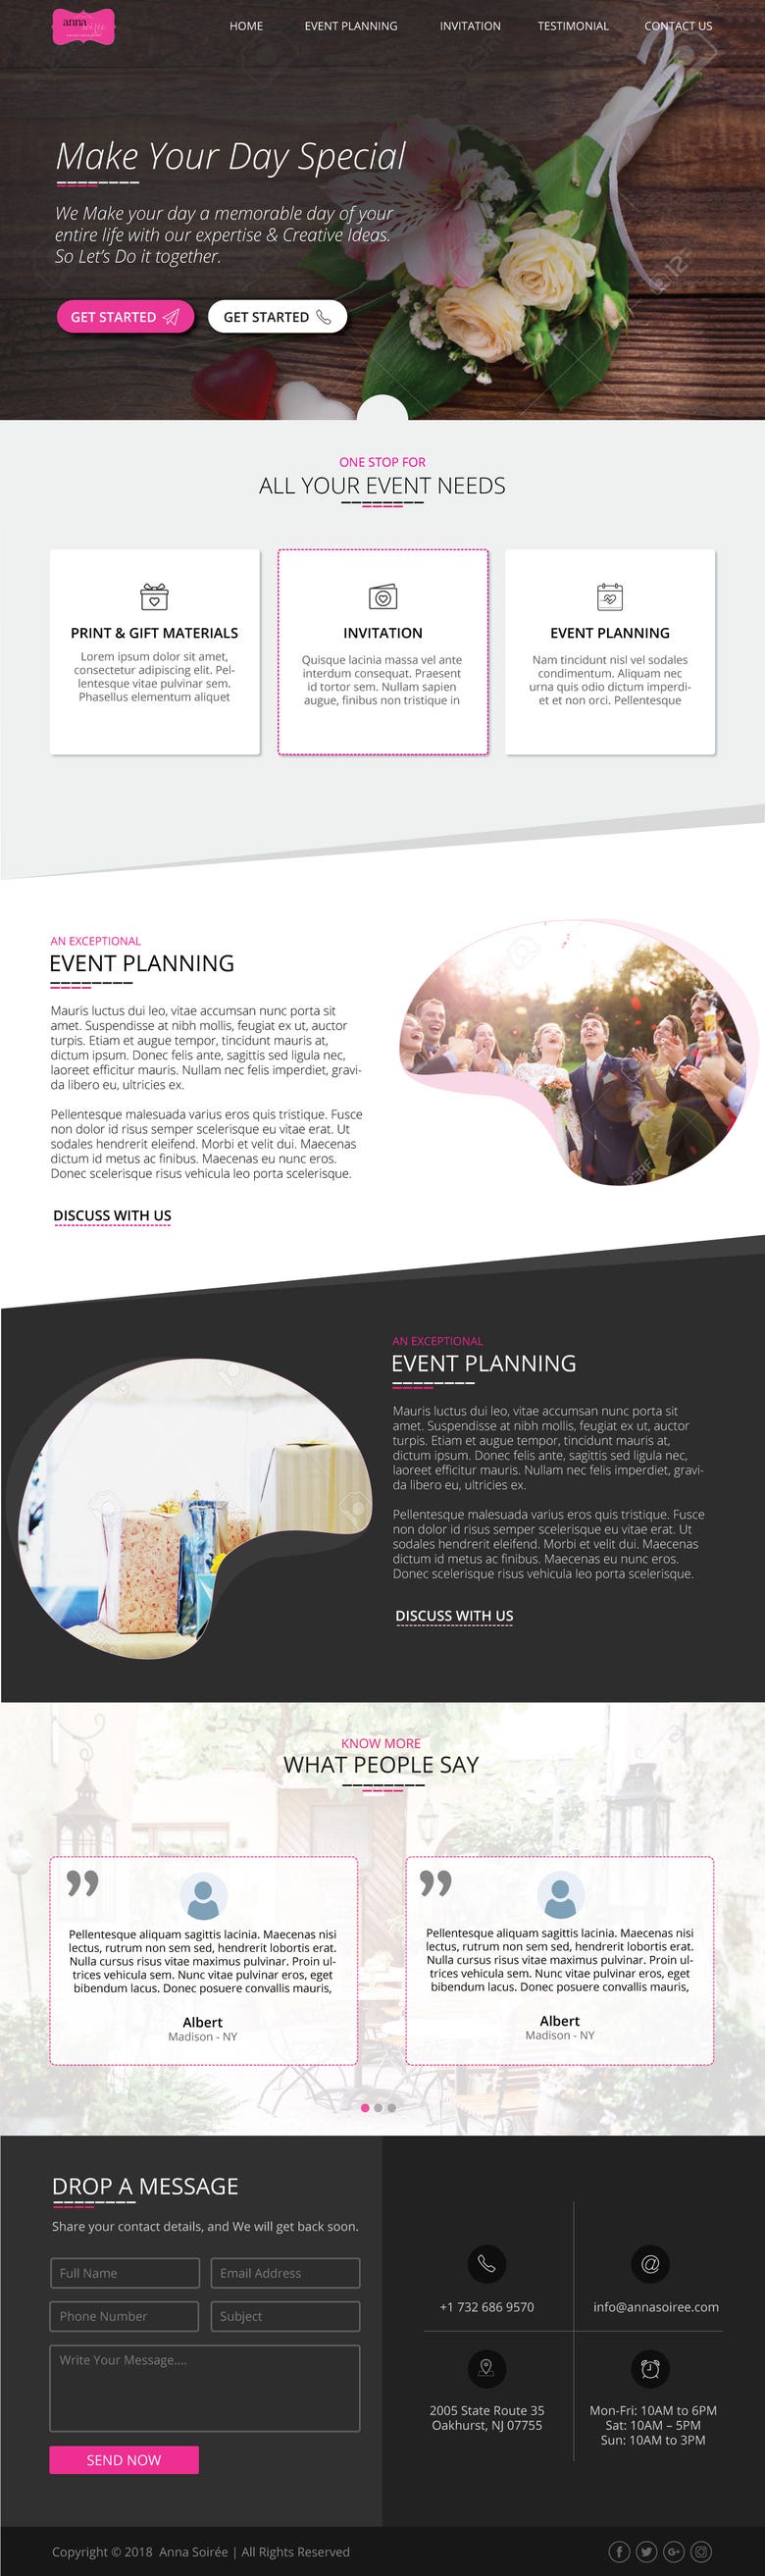 Event Planner Landing Page